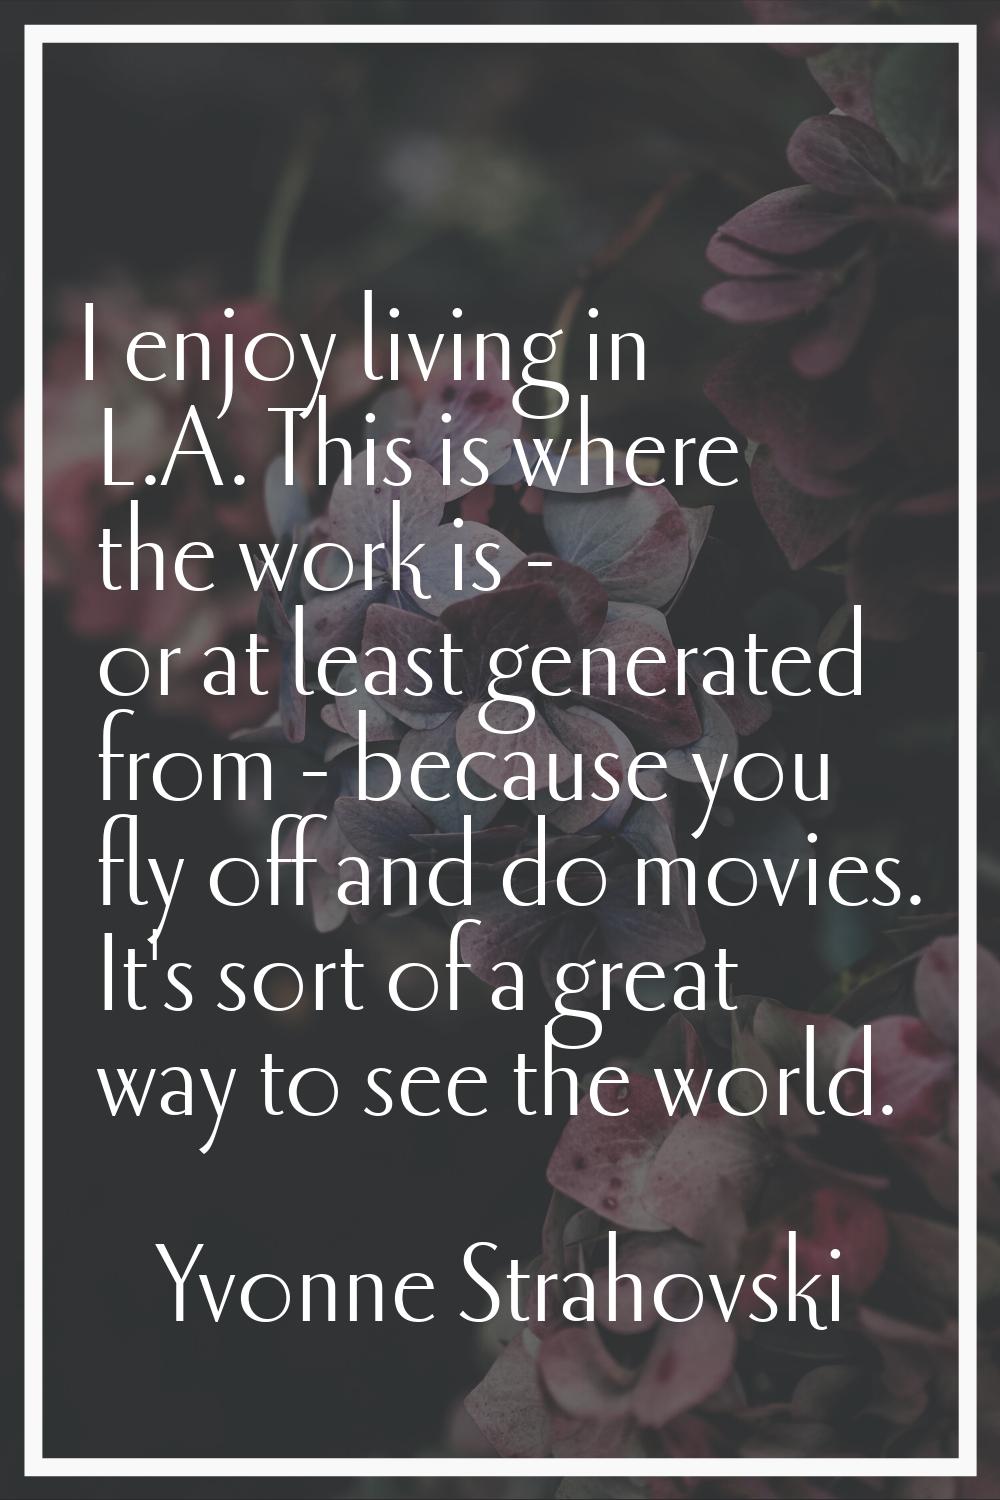 I enjoy living in L.A. This is where the work is - or at least generated from - because you fly off